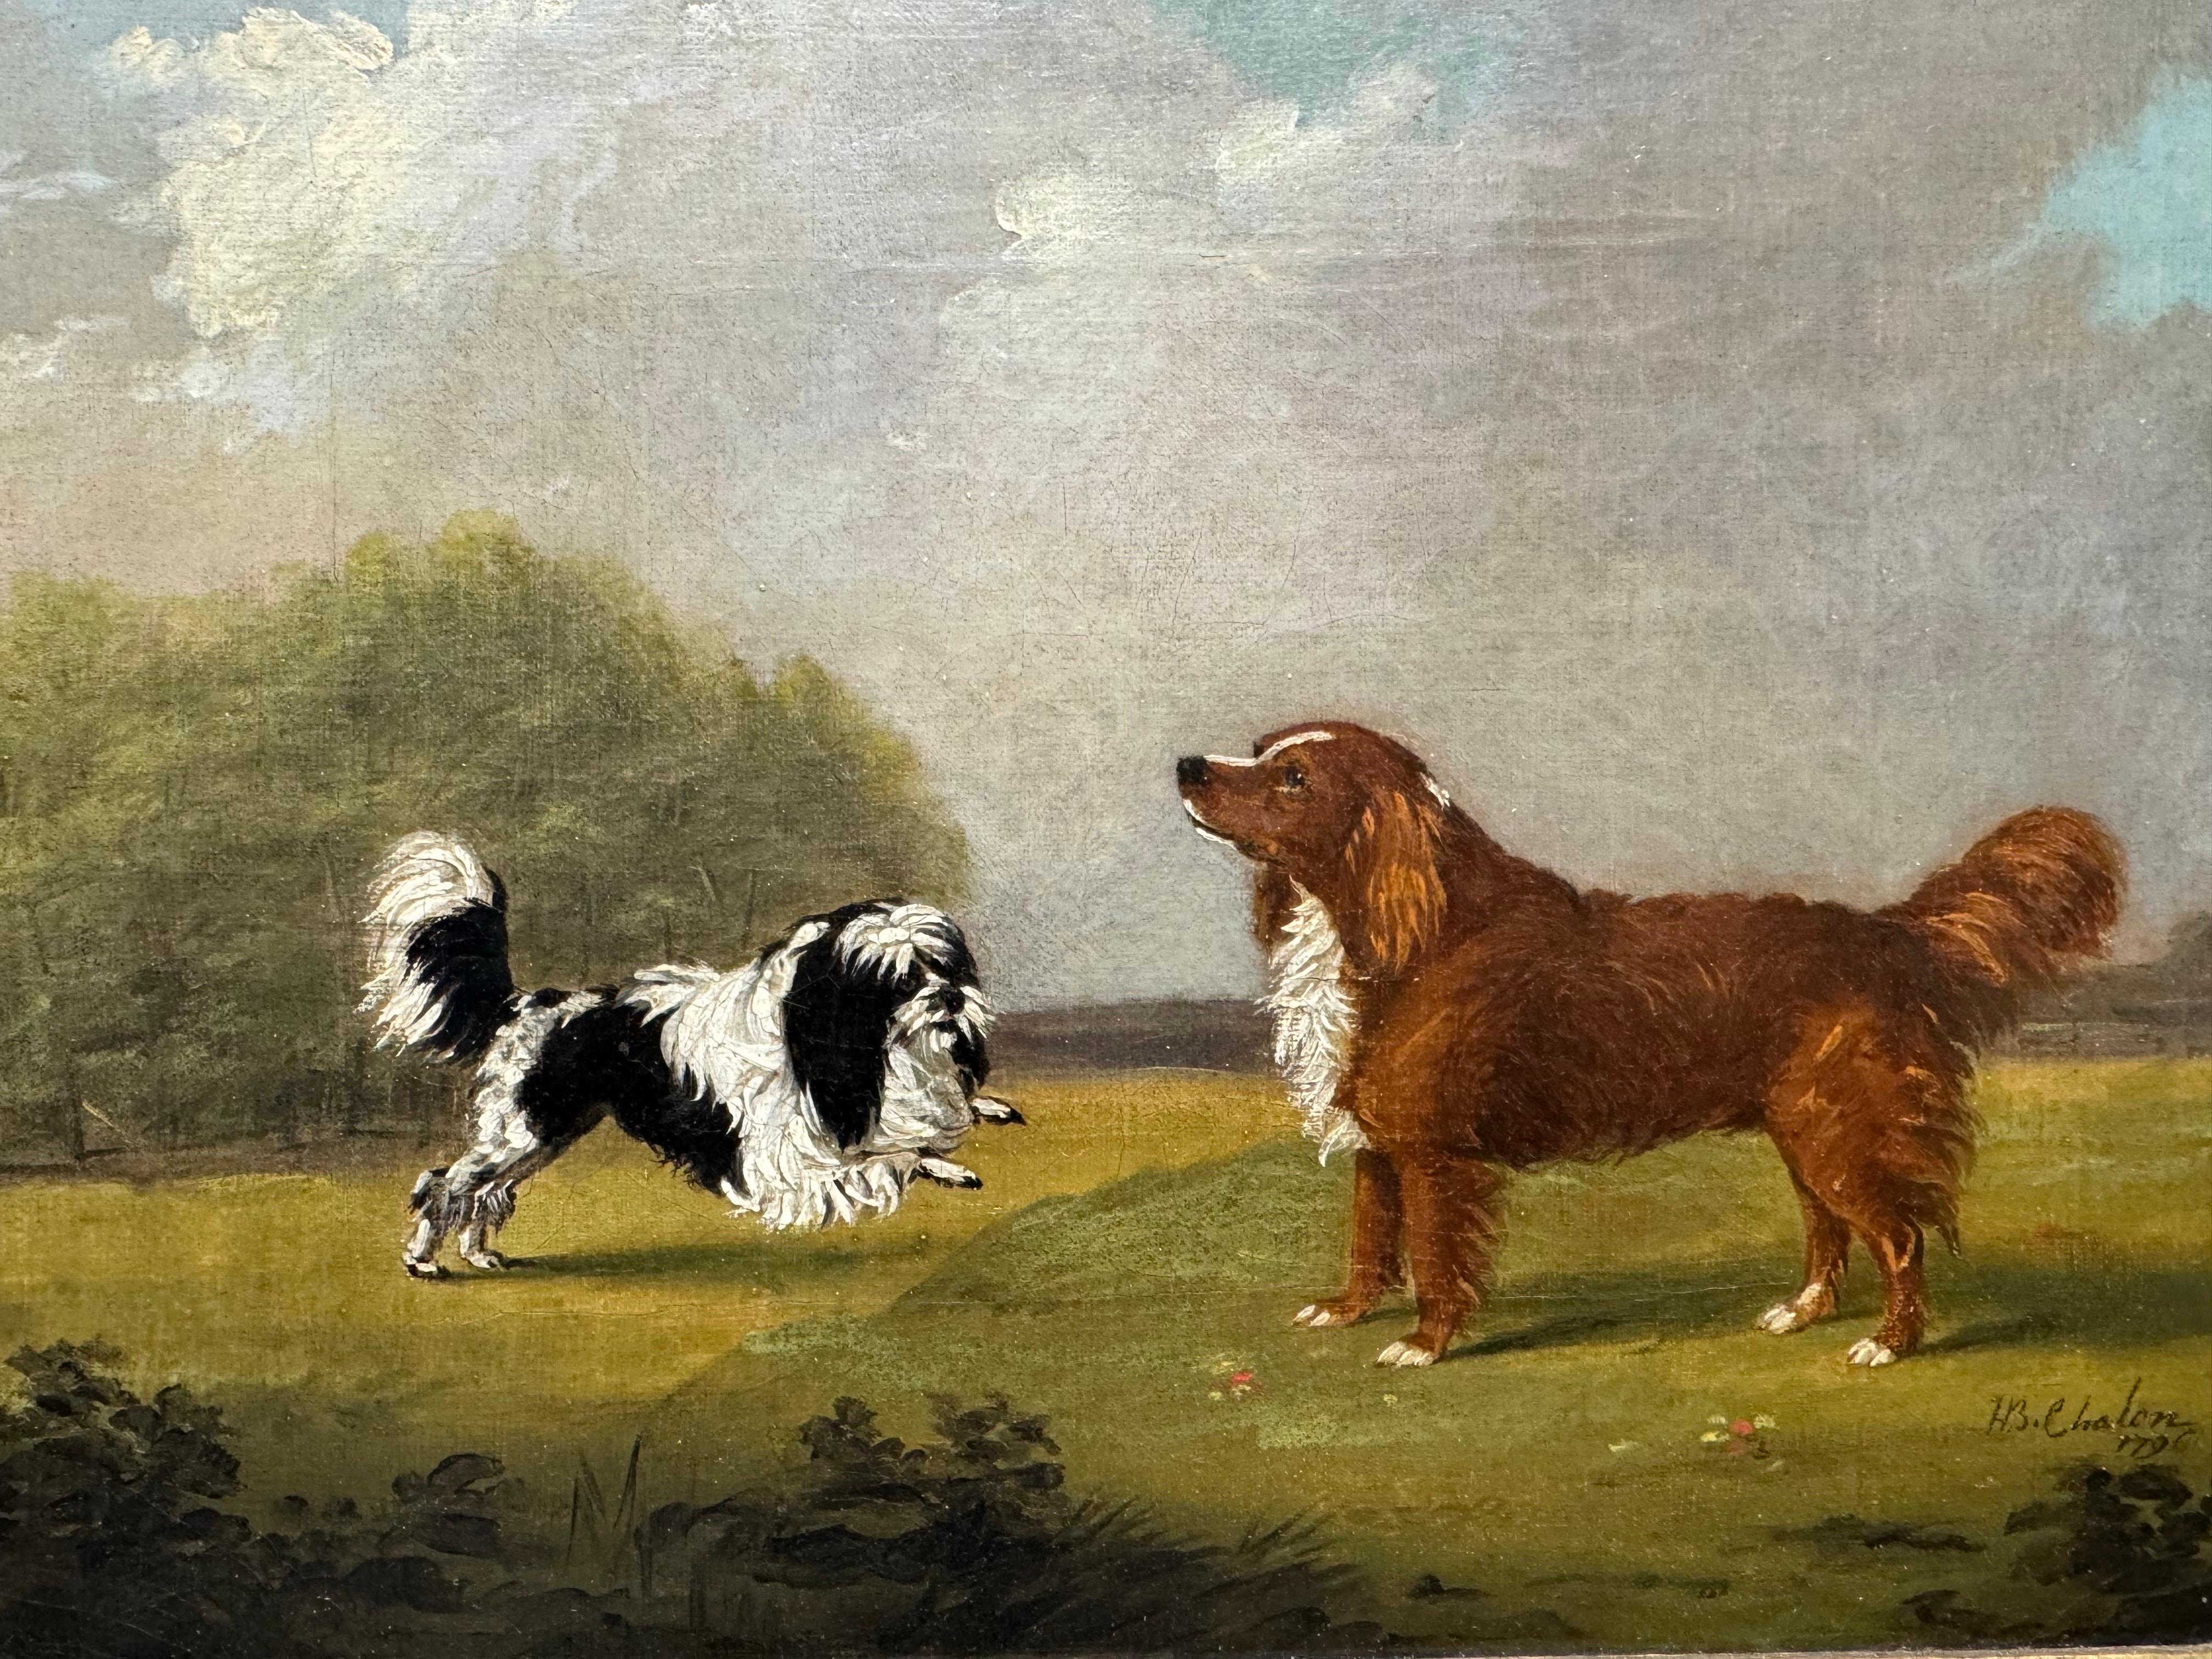 Henry Bernard Chalon (London 1770-1849)
A Löwchen and a Toller
Signed 'H. B. Chalon, 1796' lower right
Oil on canvas
Canvas Size 10 x 13 in
Framed Size 14 x 17in

Henry Bernard Chalon (1770-1849) was an English artist celebrated for his exquisite